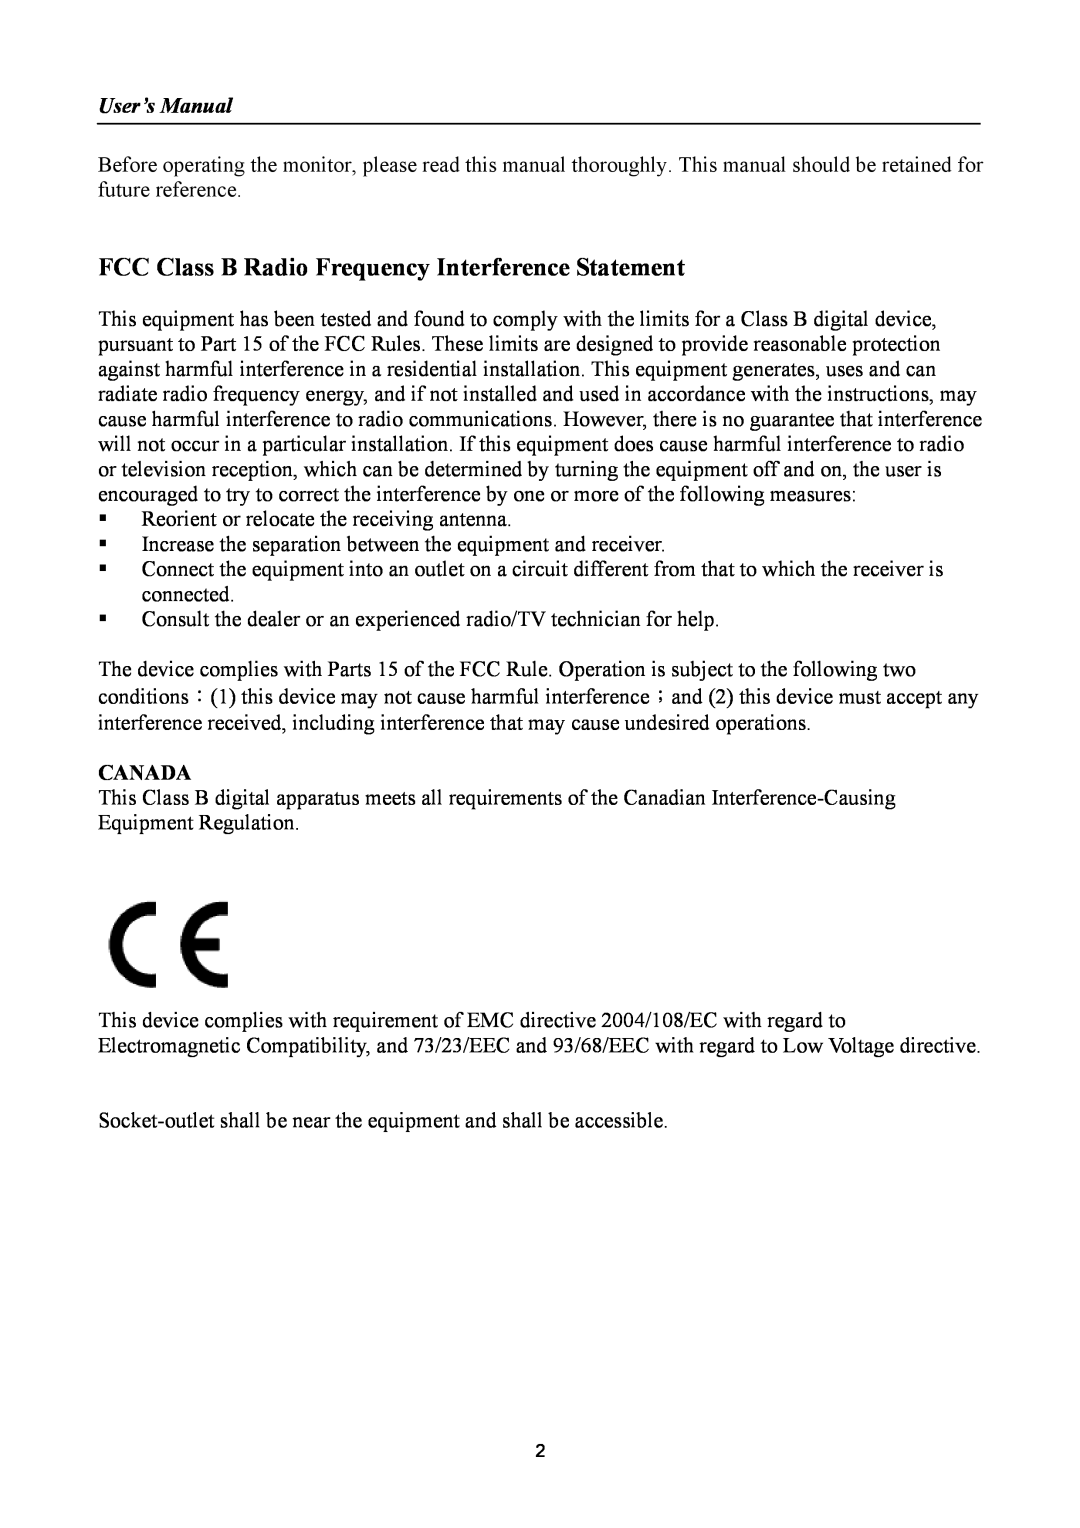 Hanns.G HH221 manual FCC Class B Radio Frequency Interference Statement, User’s Manual, Canada 